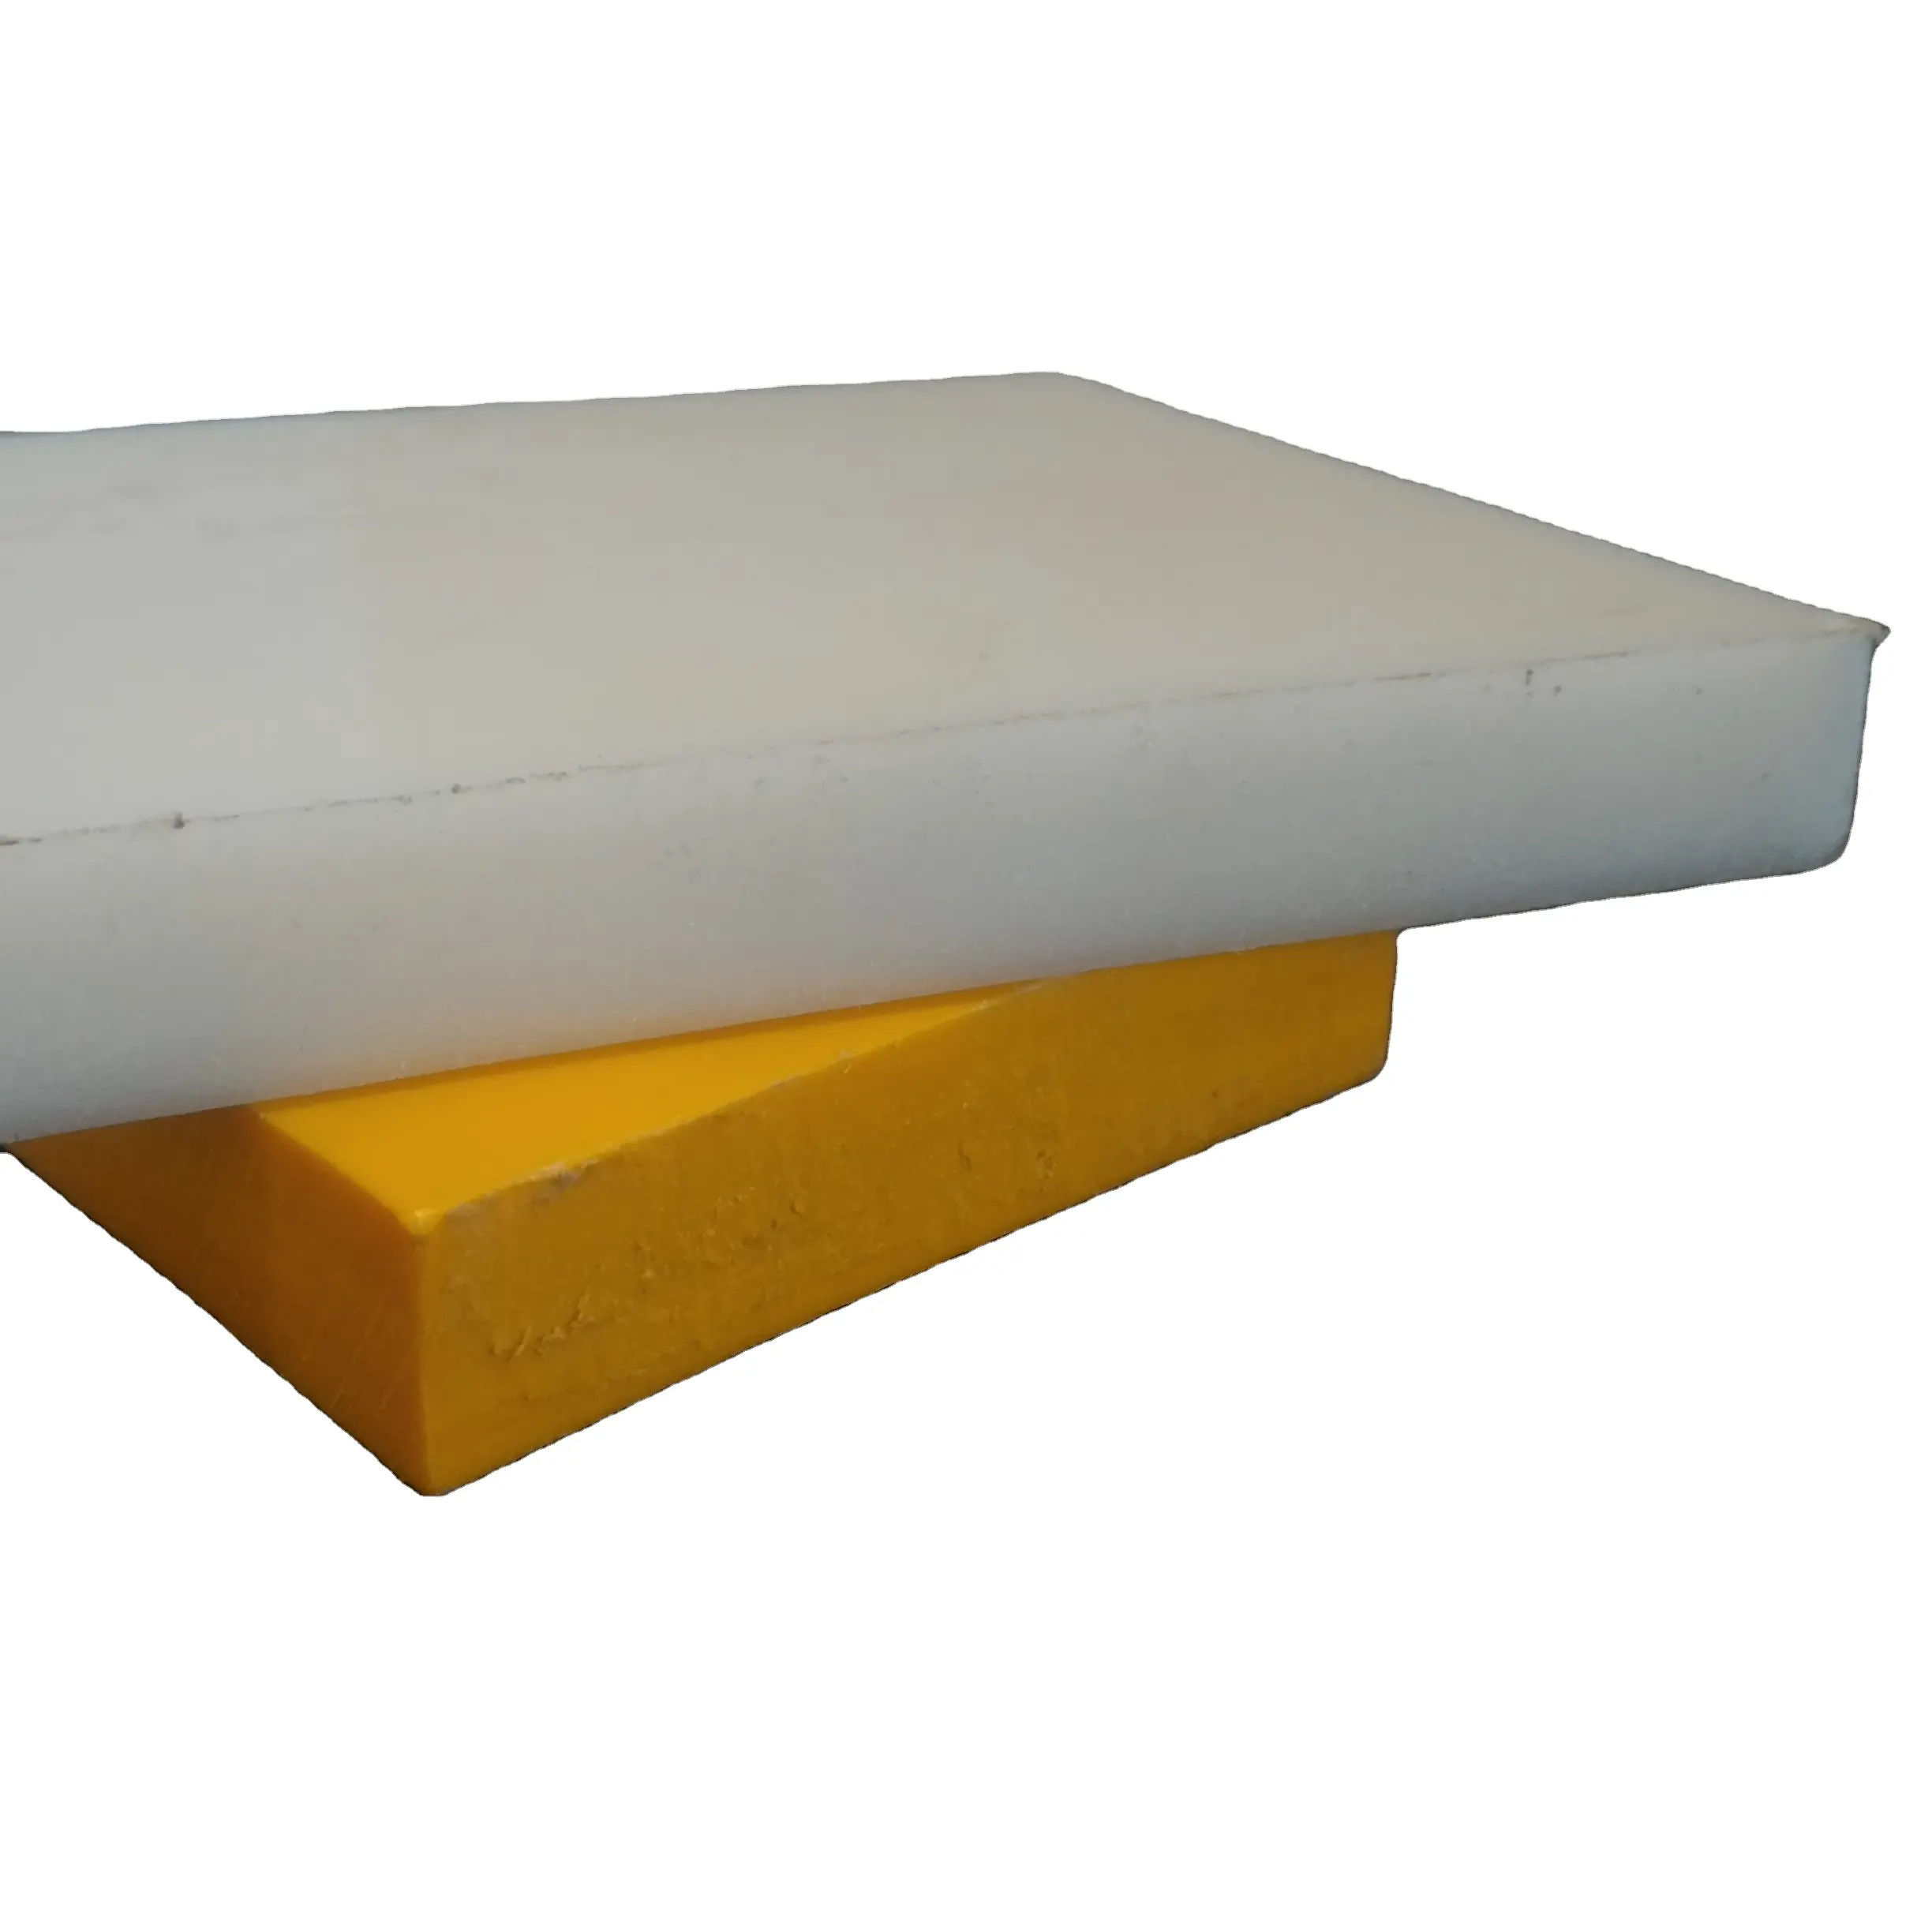 UP virgin grade plastic sheet uhmwpe solid sheet white color 2 to 100 mm thick strong polymer iso 9001:2015 certified company